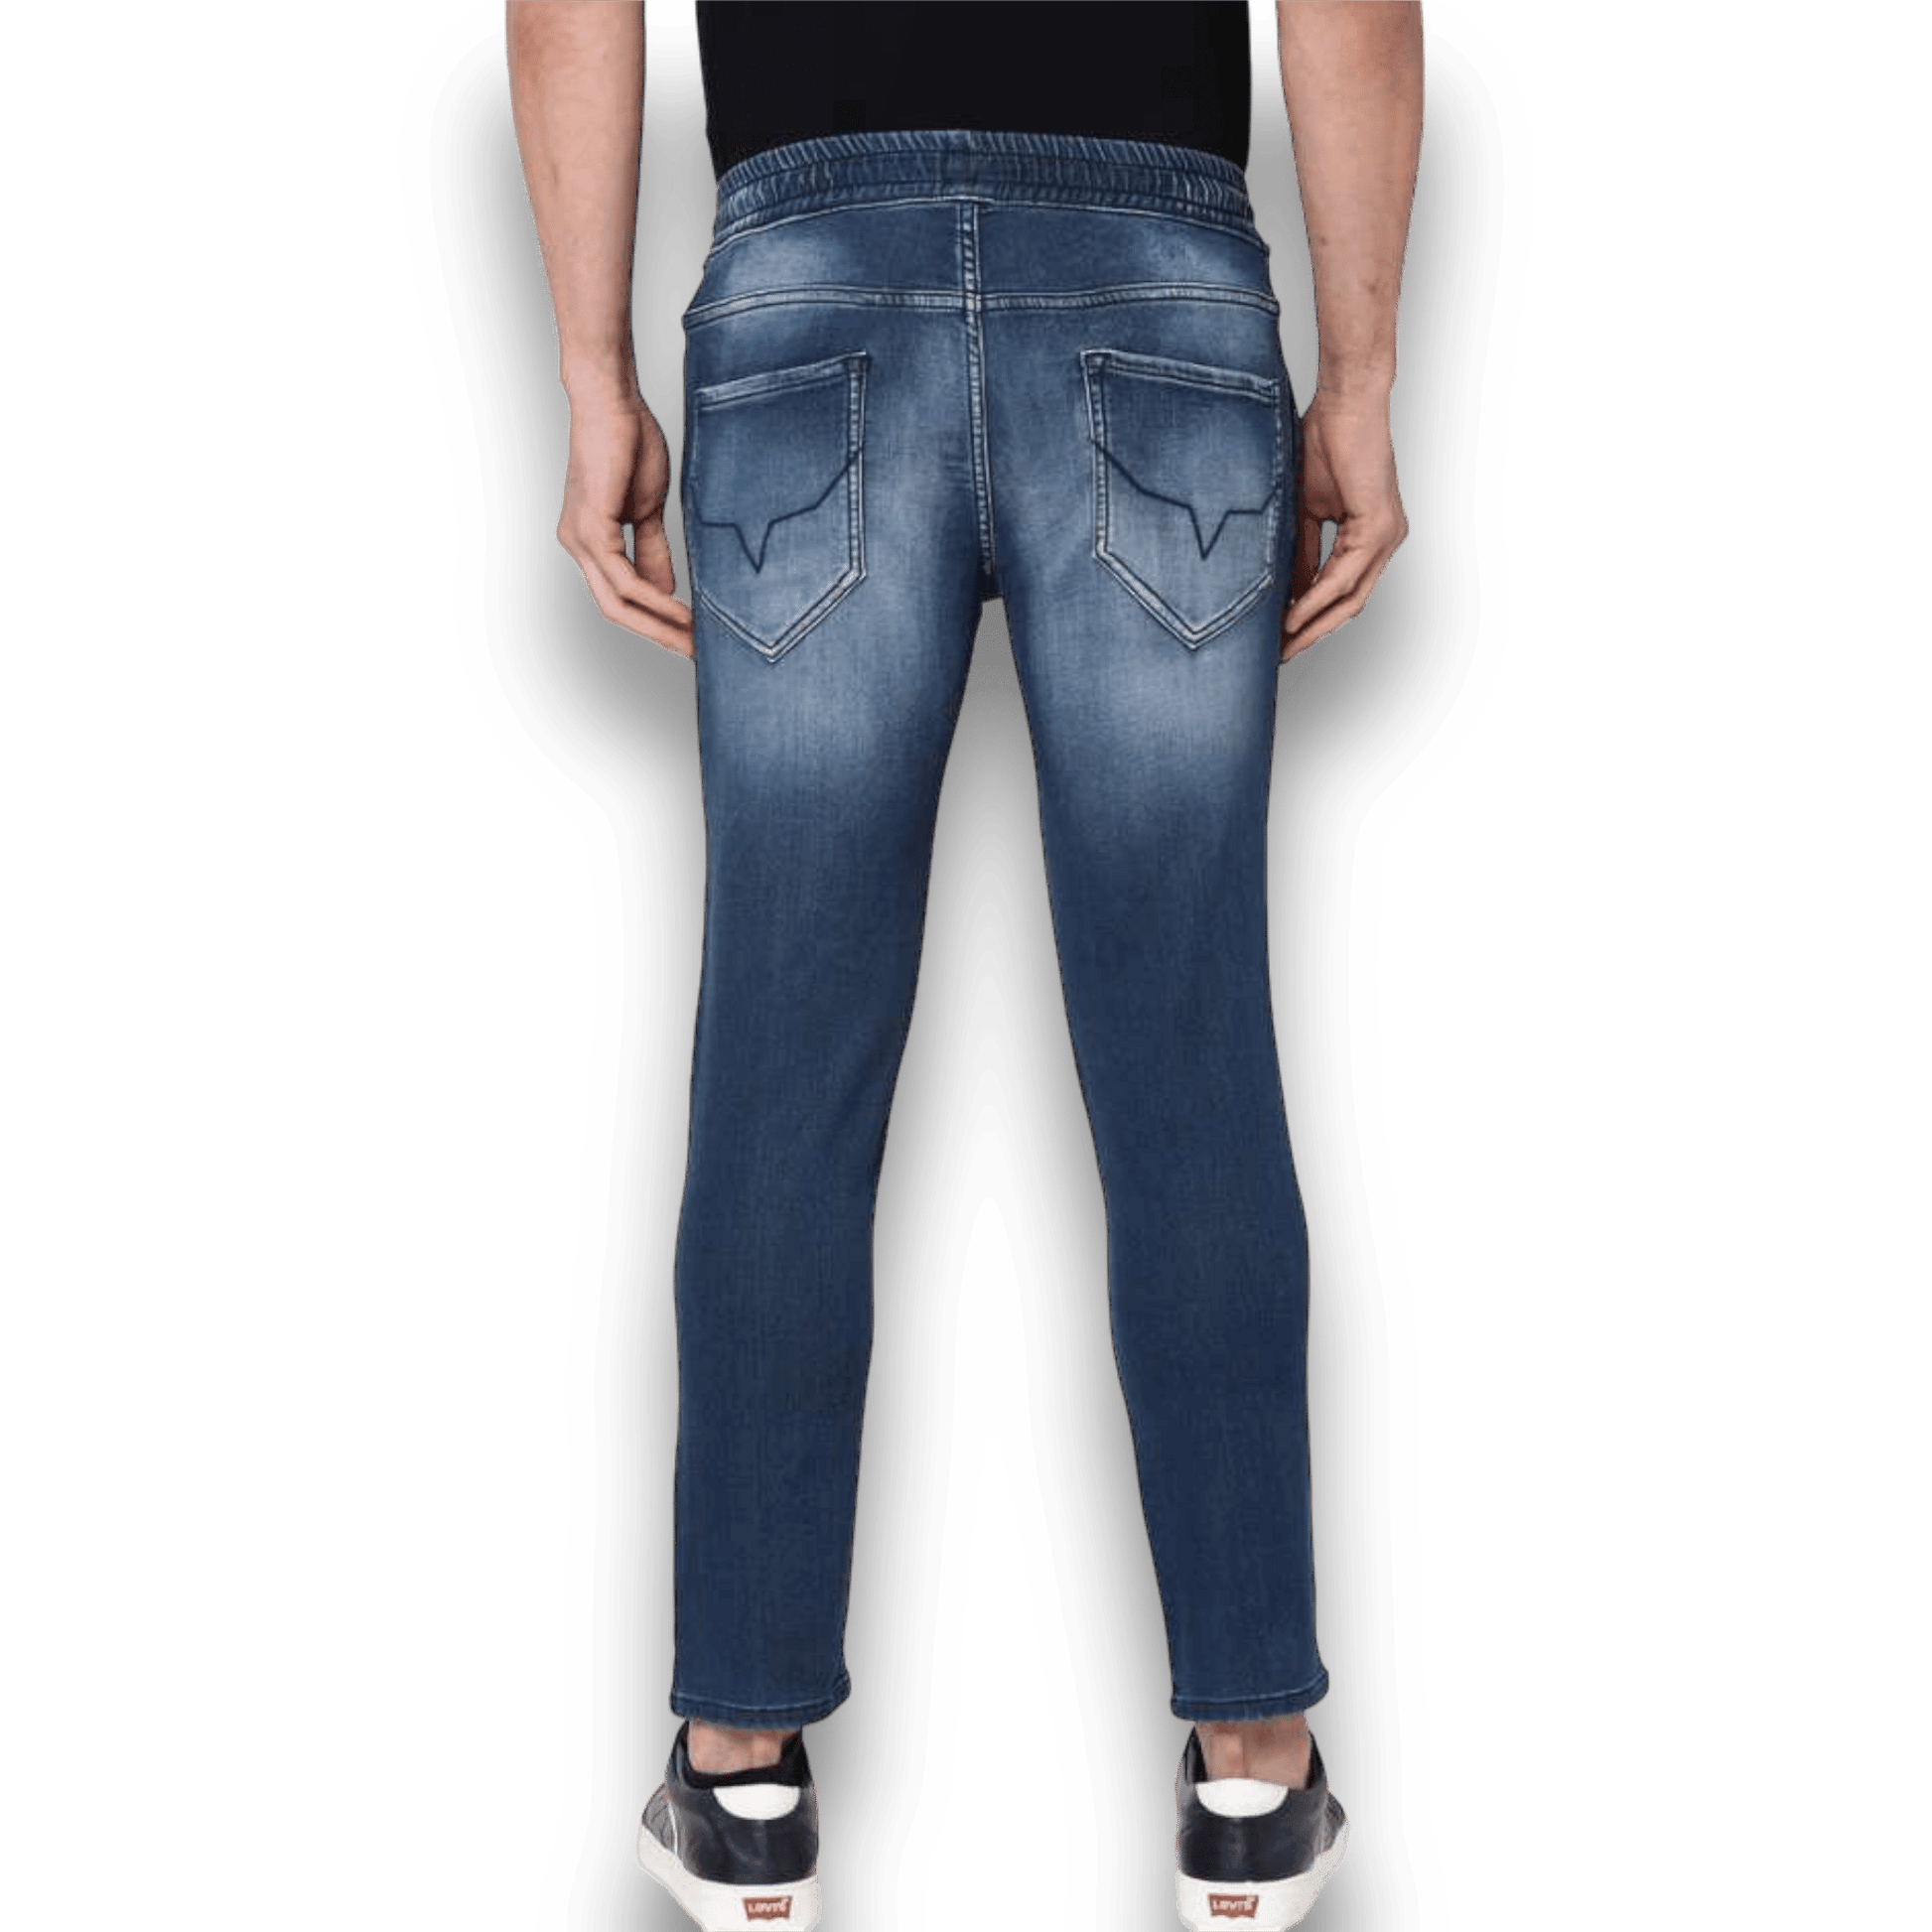 Mens Jogger Fit mid rise Blue Jeans - Apparel For Less